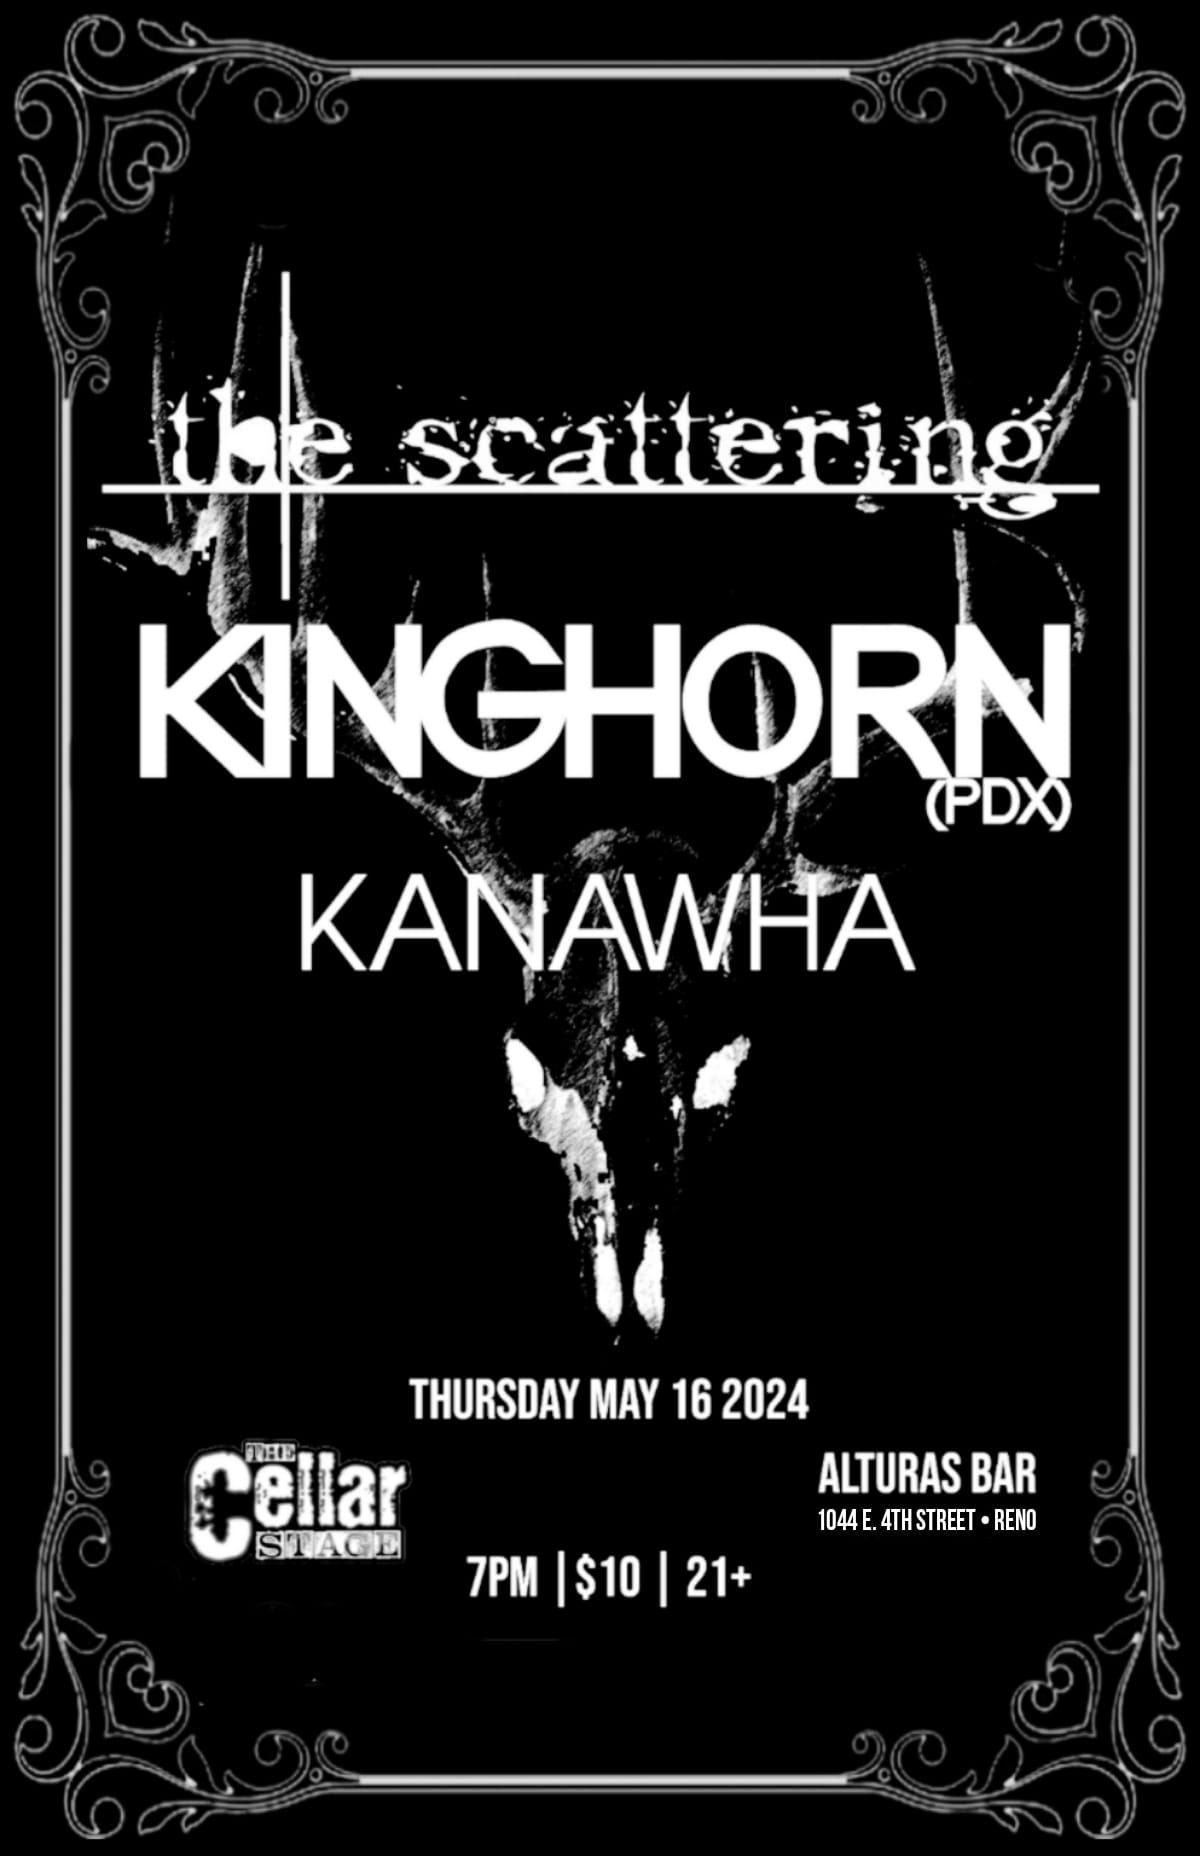 The SCATTERING with Kinghorn (PDX) and Kanawha